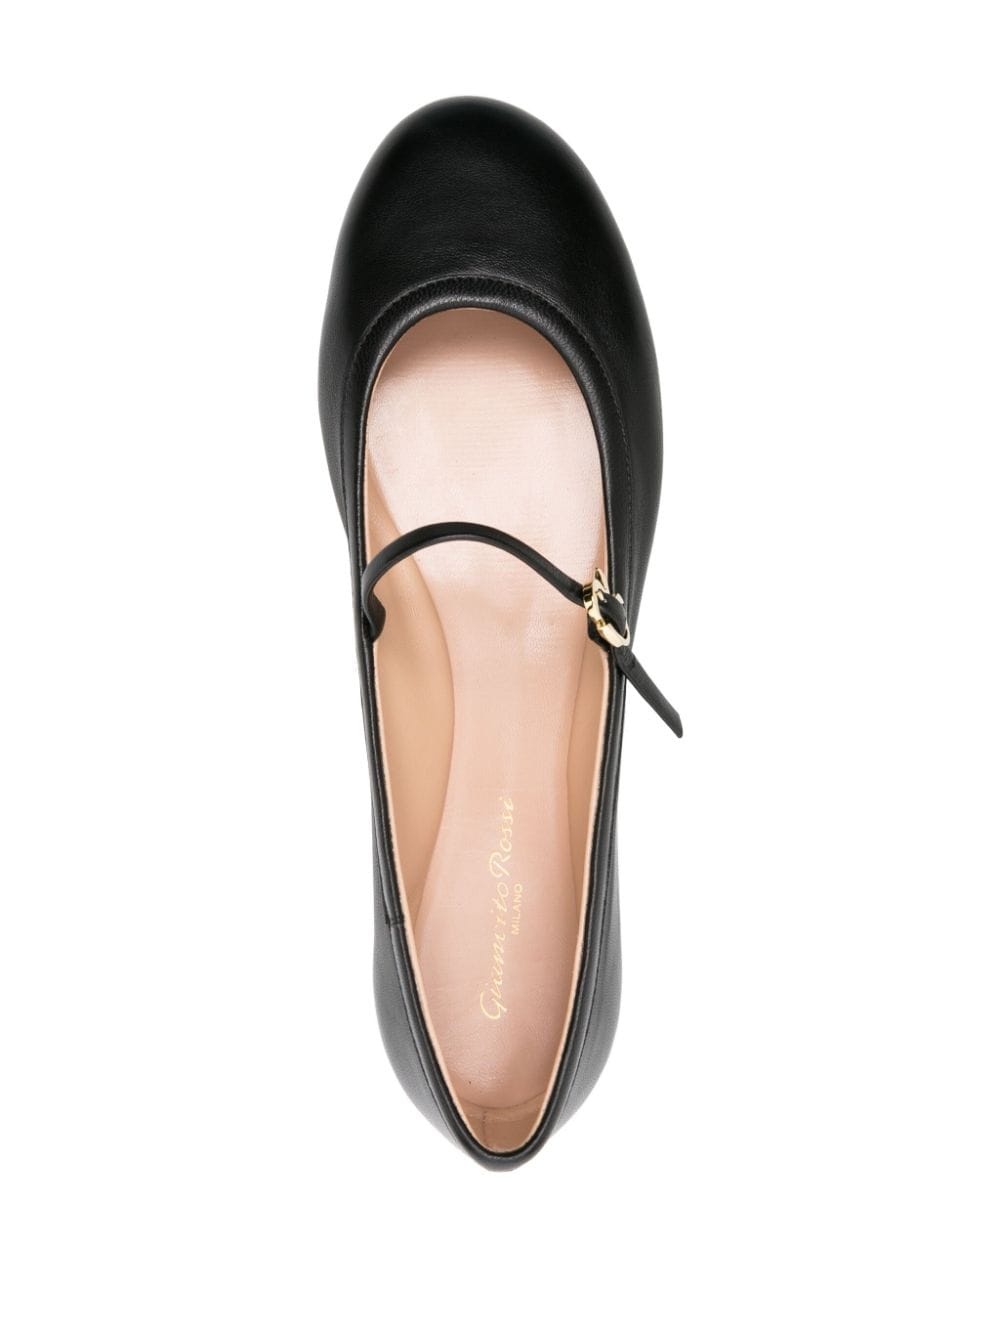 round-toe leather ballerina shoes - 4